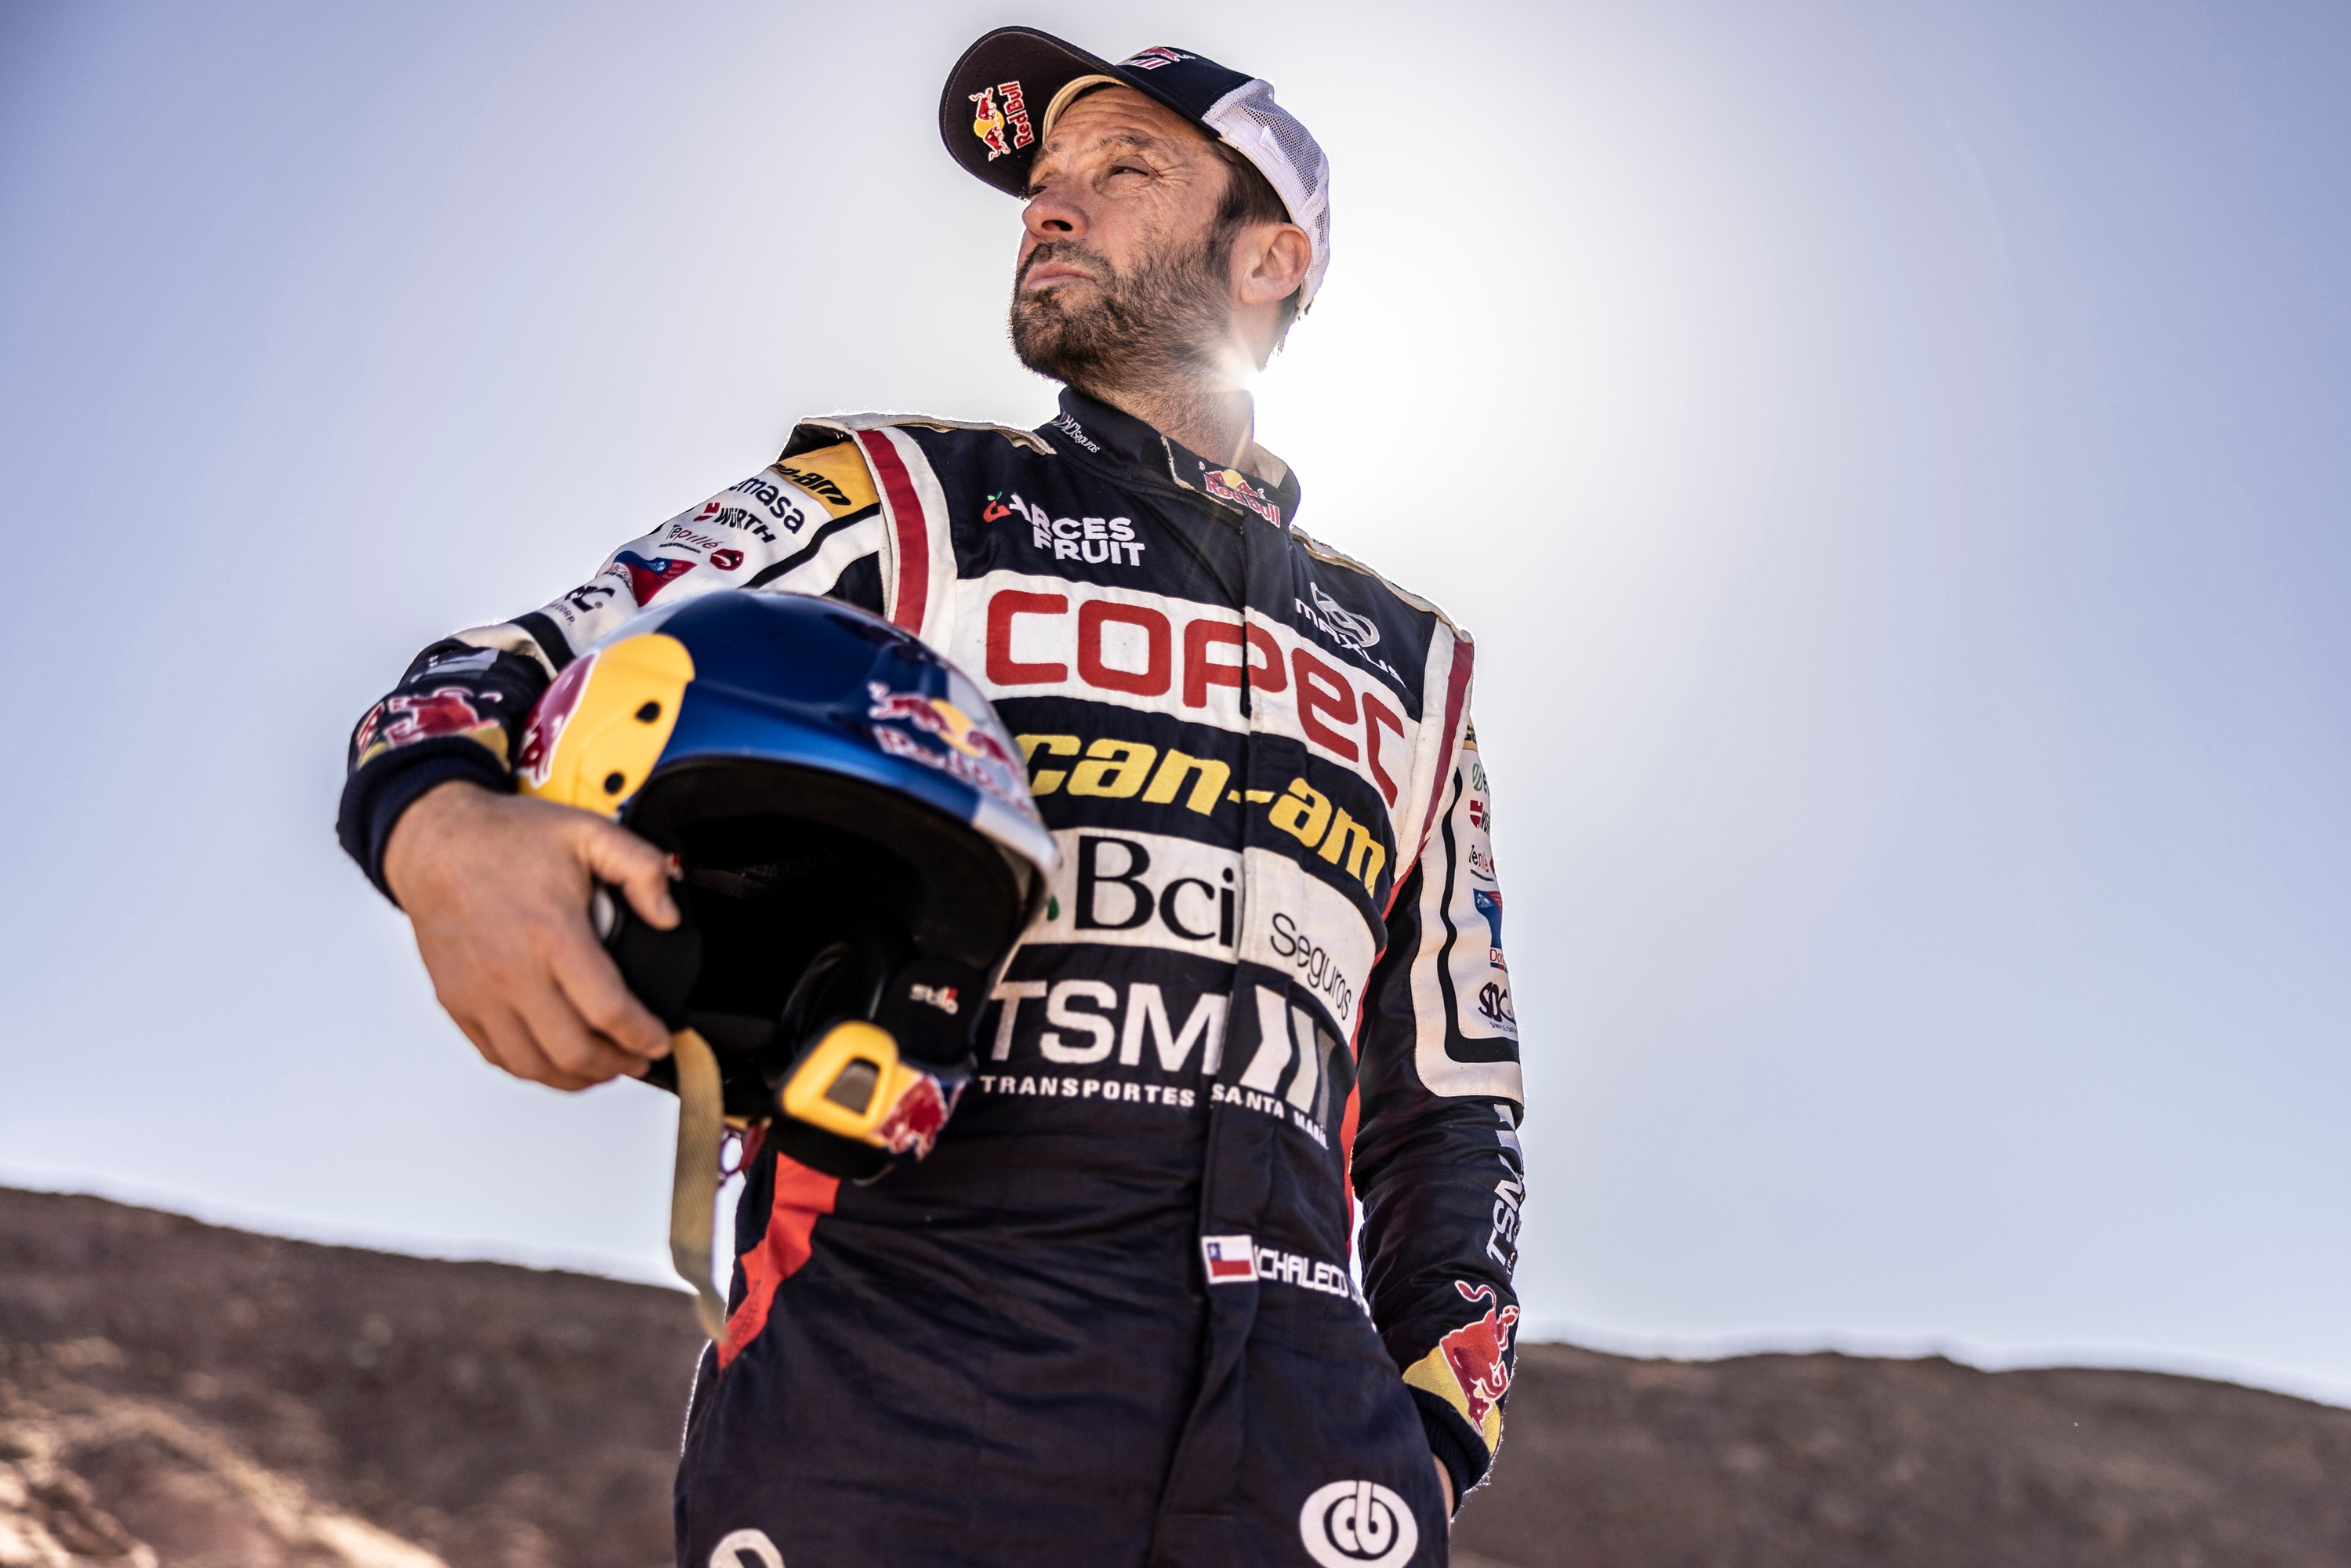 Francisco "Chaleco" Lopez wearing his helmet during the Dakar 2023